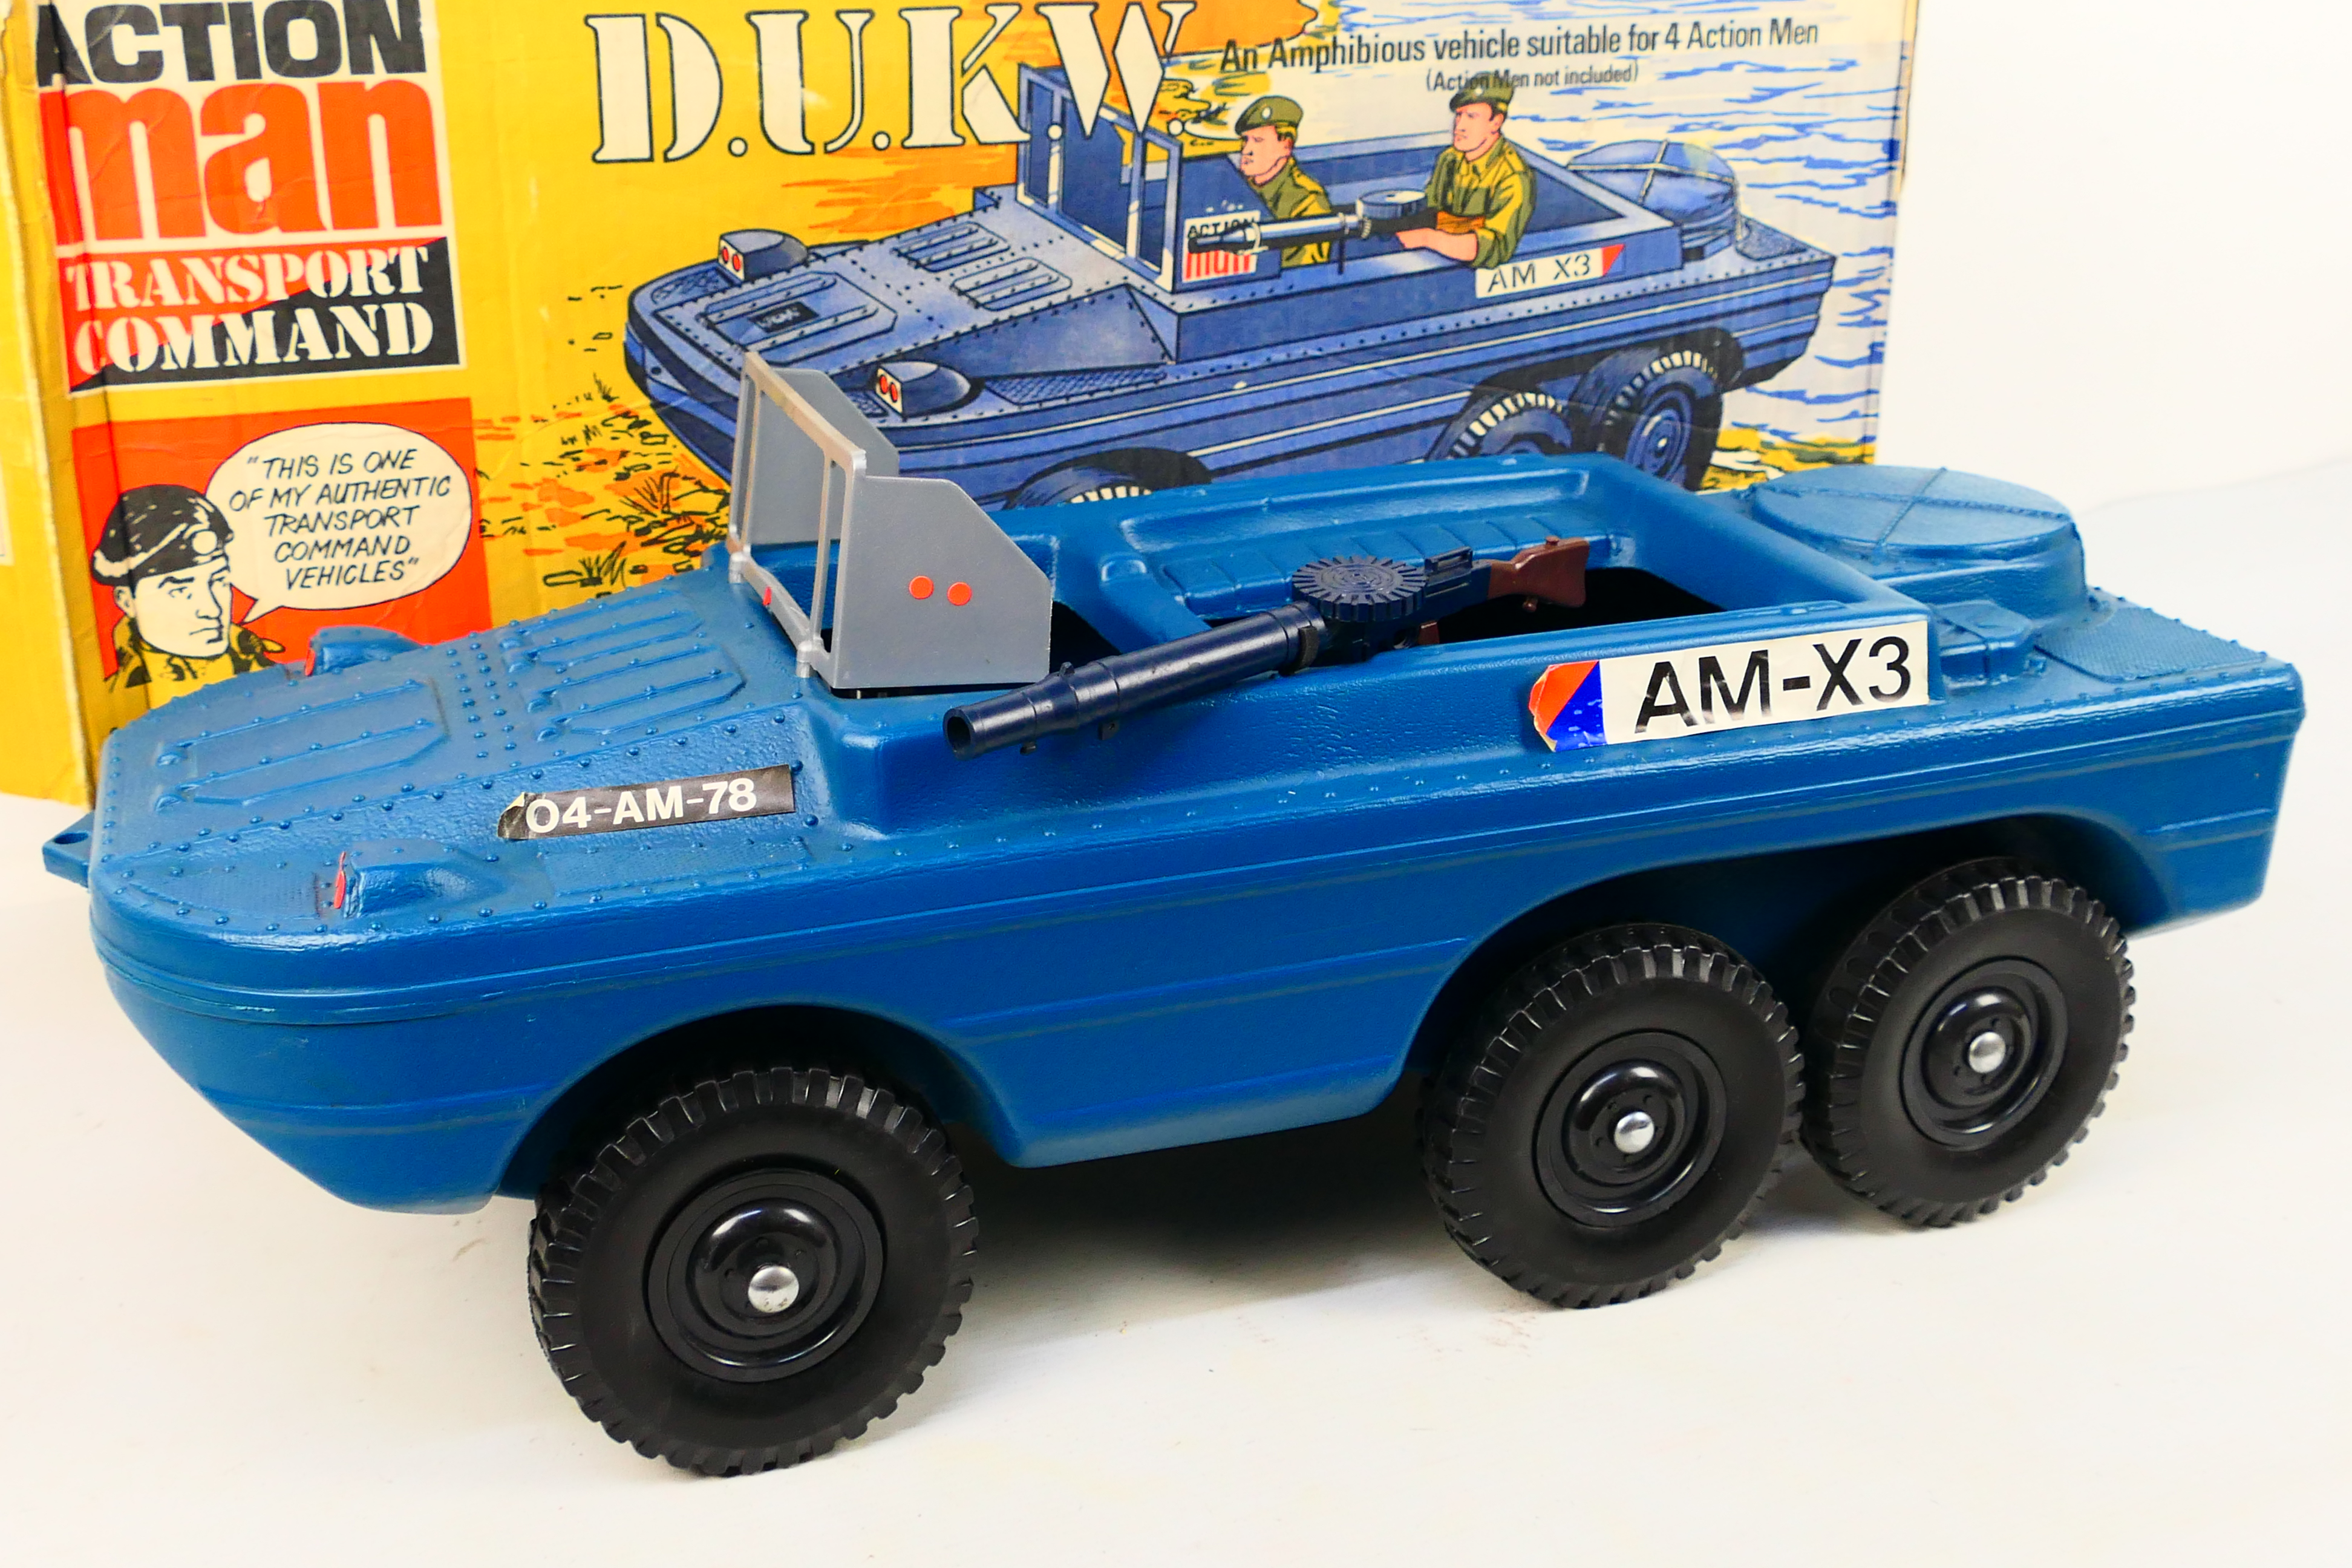 Palitoy - Action Man - A boxed vintage Action Man Transport Command D.U.K.W. # 34739. - Image 2 of 5